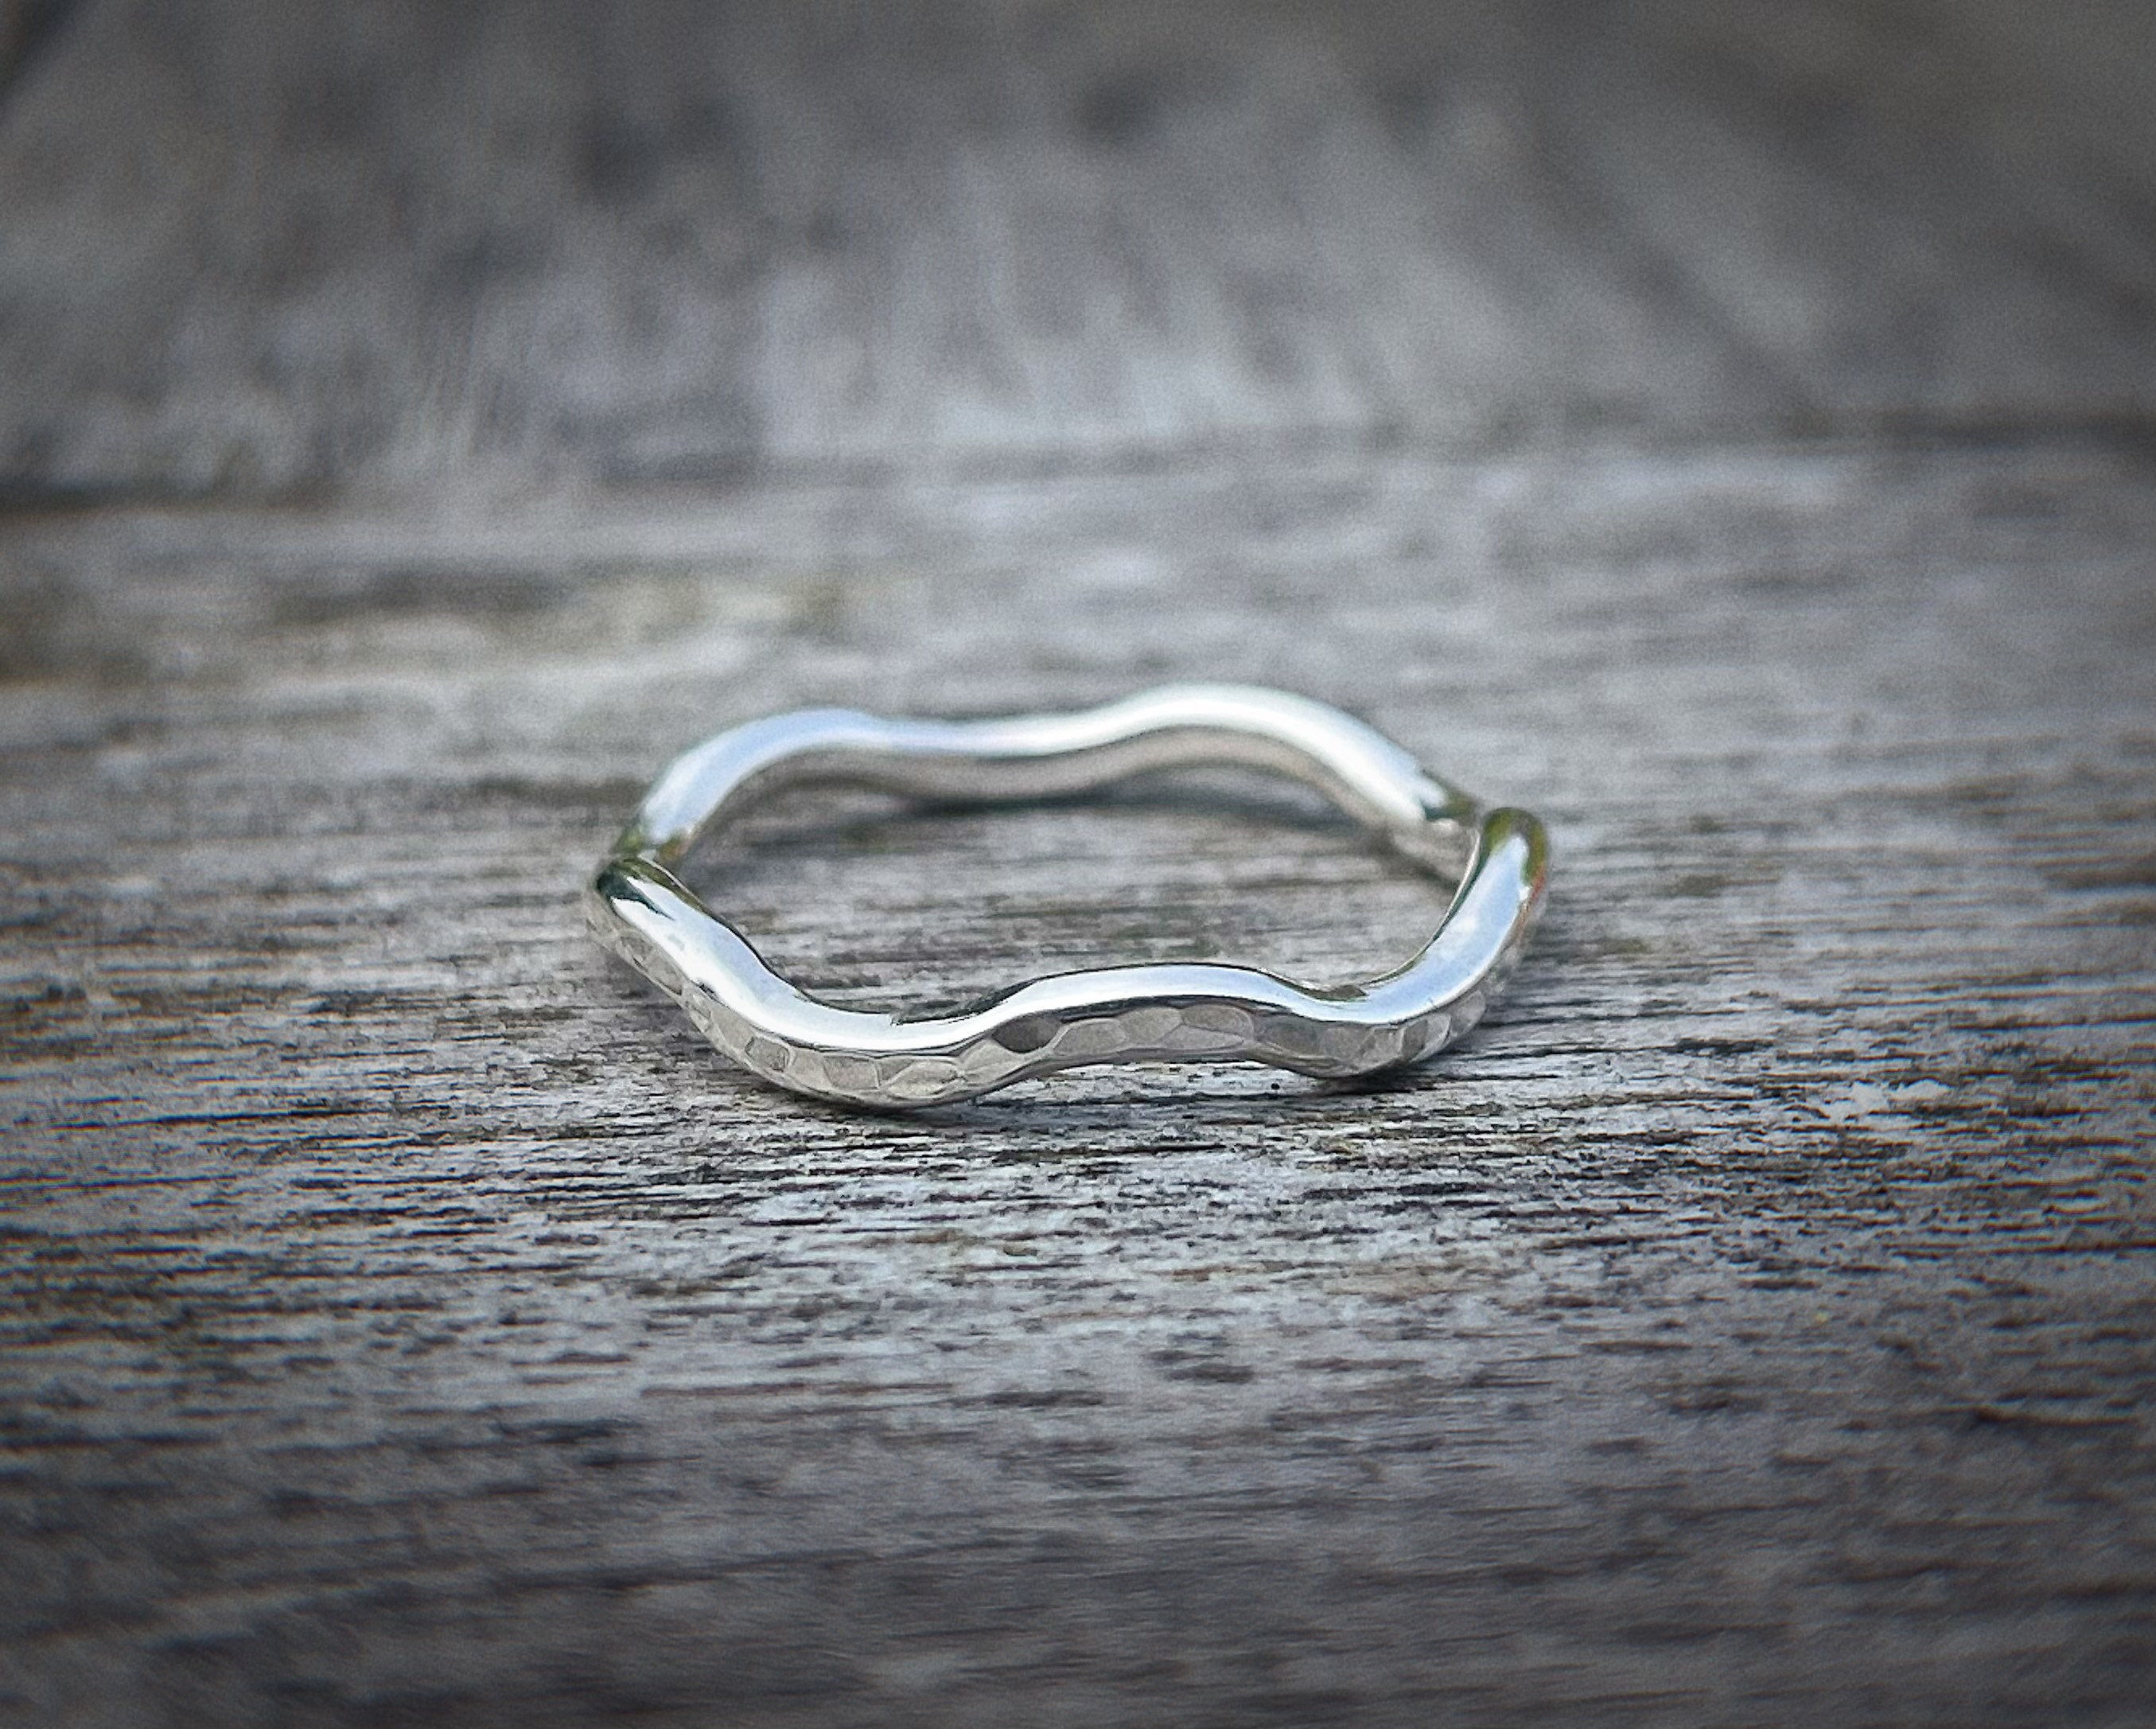 Handmade Sterling Silver Wavy Ring, Sterling Silver Hammered Ring, Polished  or Oxidised, Gift for Her